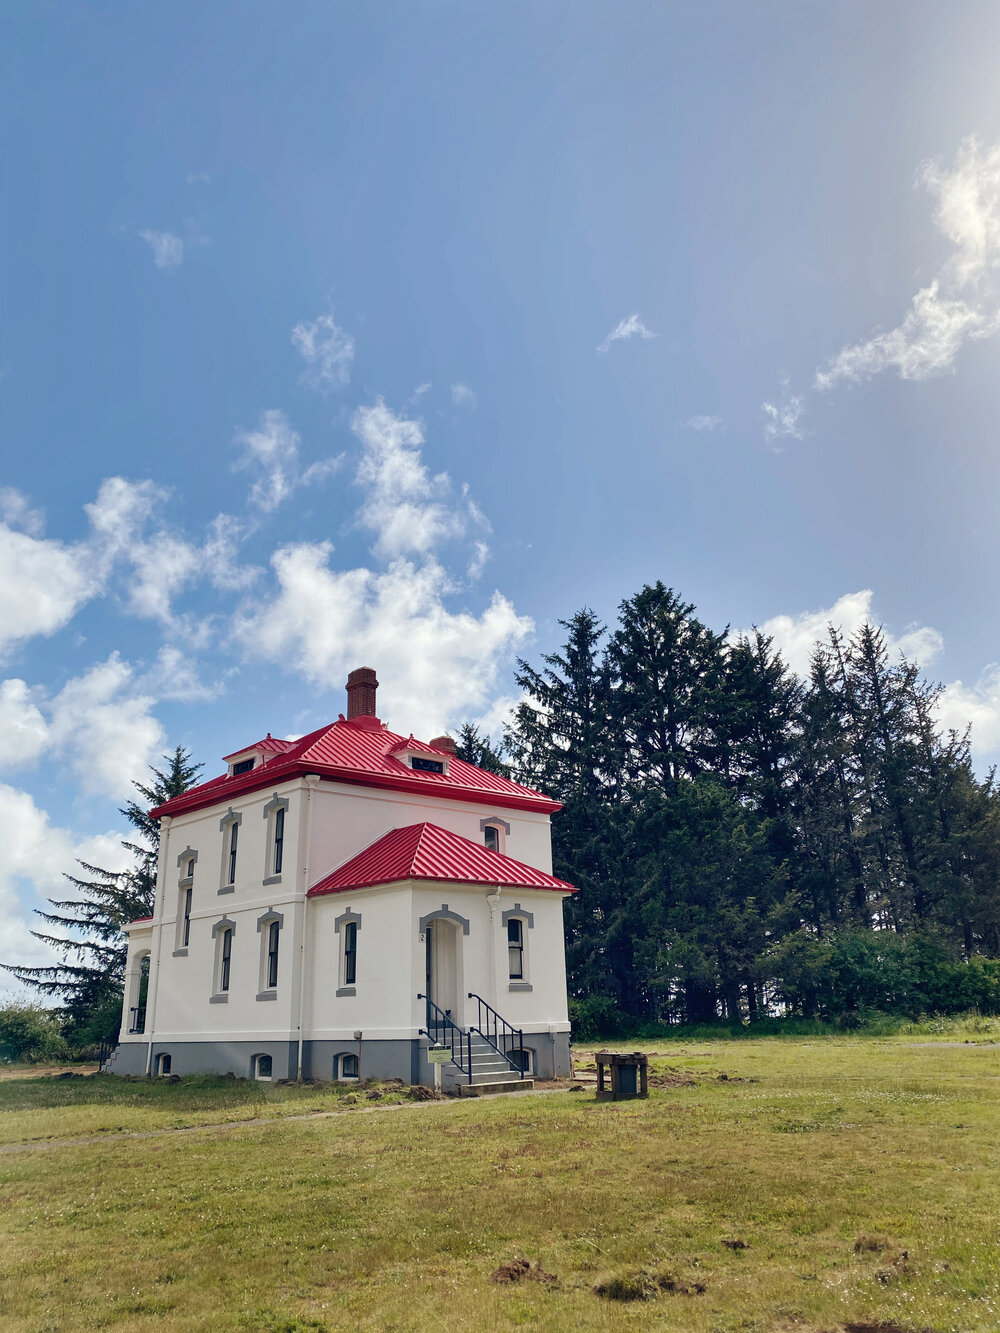 Cape Disappointment North Head Lighthouse Full Park Review